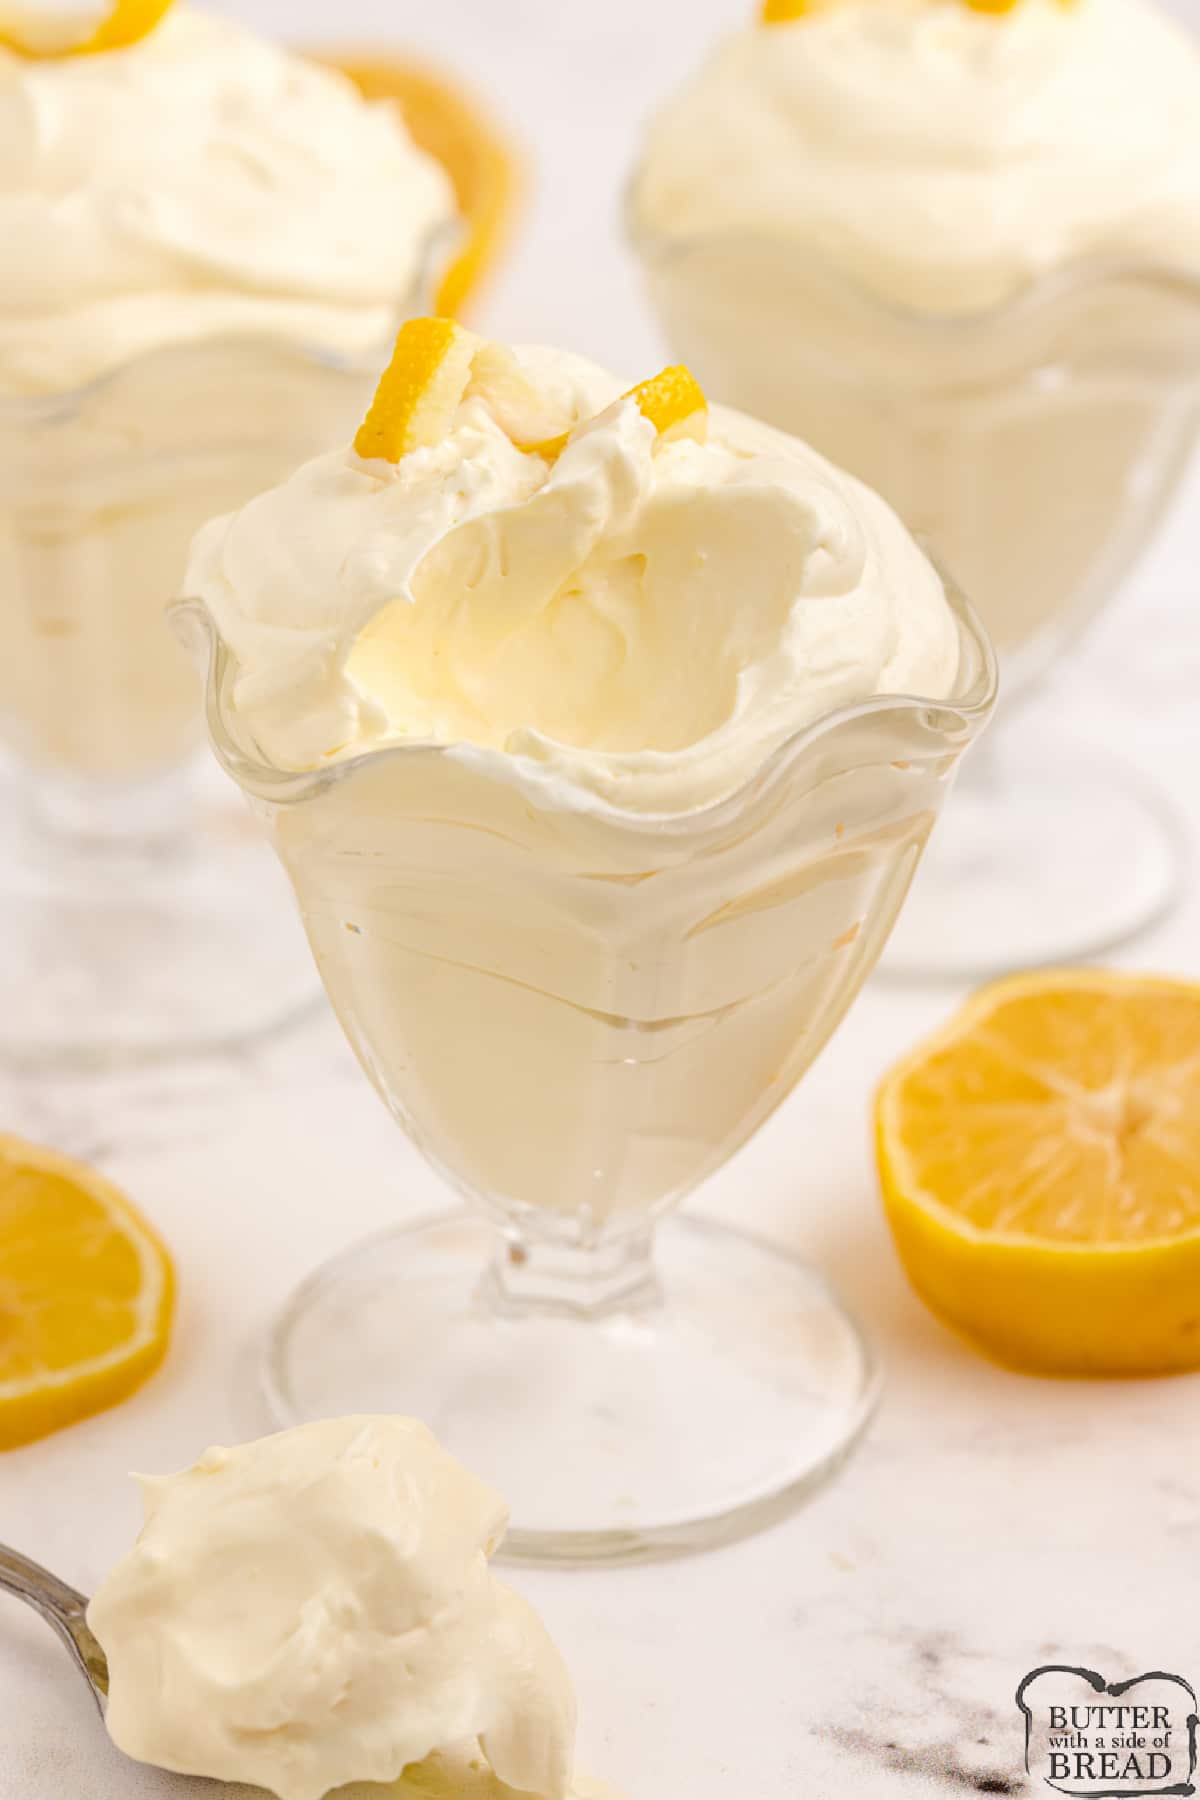 Lemon jello made with vanilla pudding and whipped topping